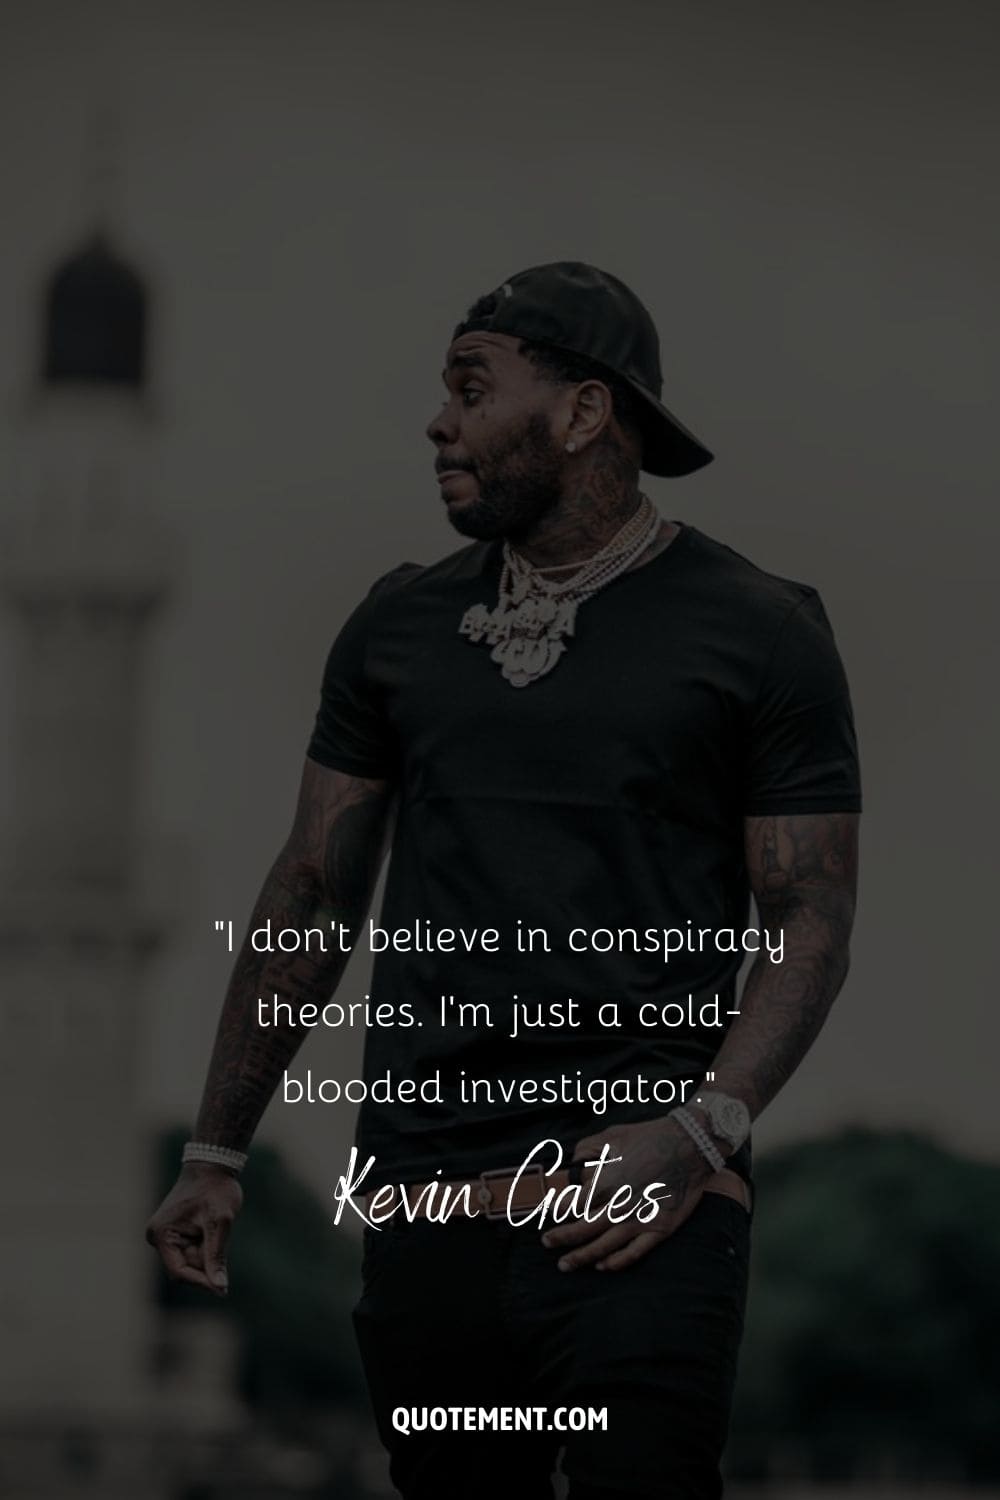 “I don’t believe in conspiracy theories. I’m just a cold-blooded investigator.” – Kevin Gates